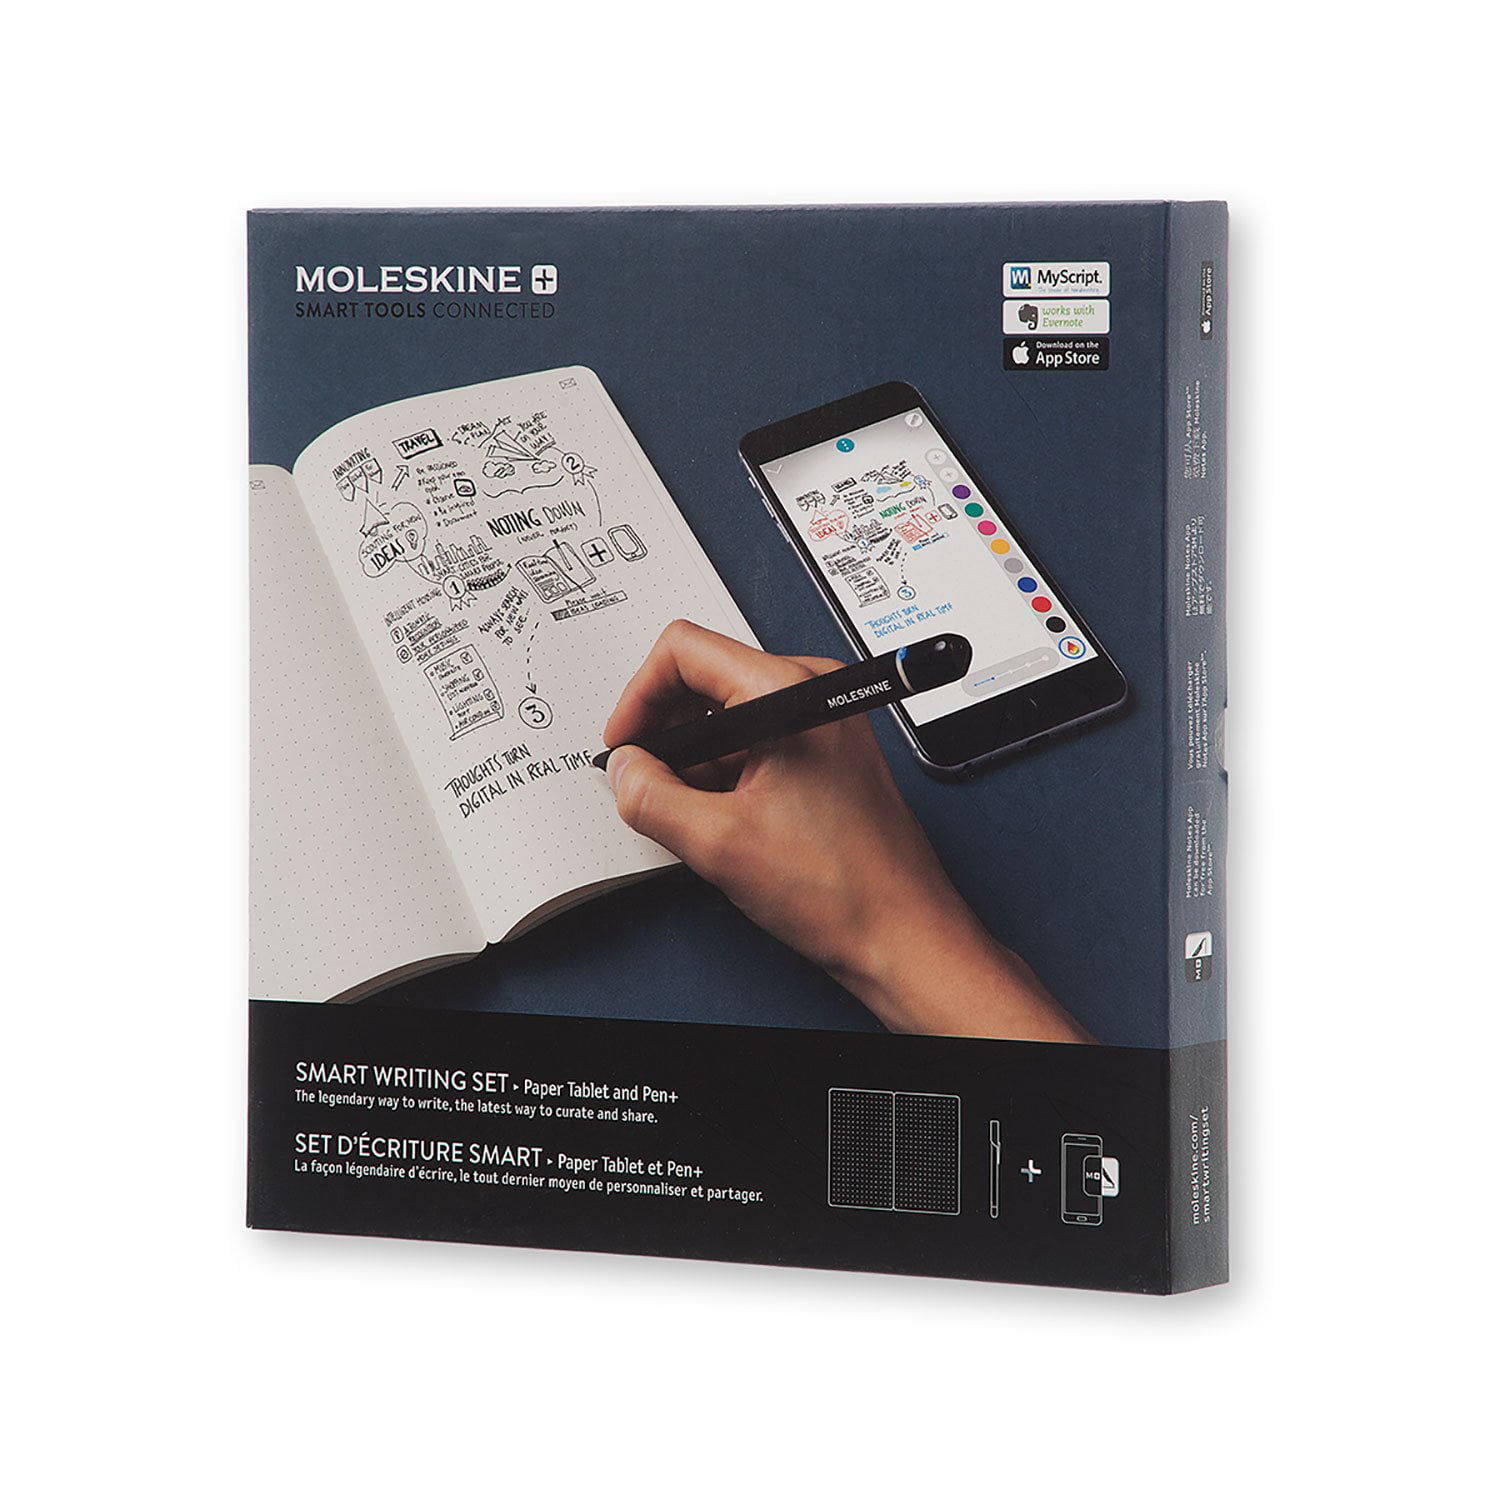 Moleskine smart writing set review: Traditional note-taking with a digital  touch